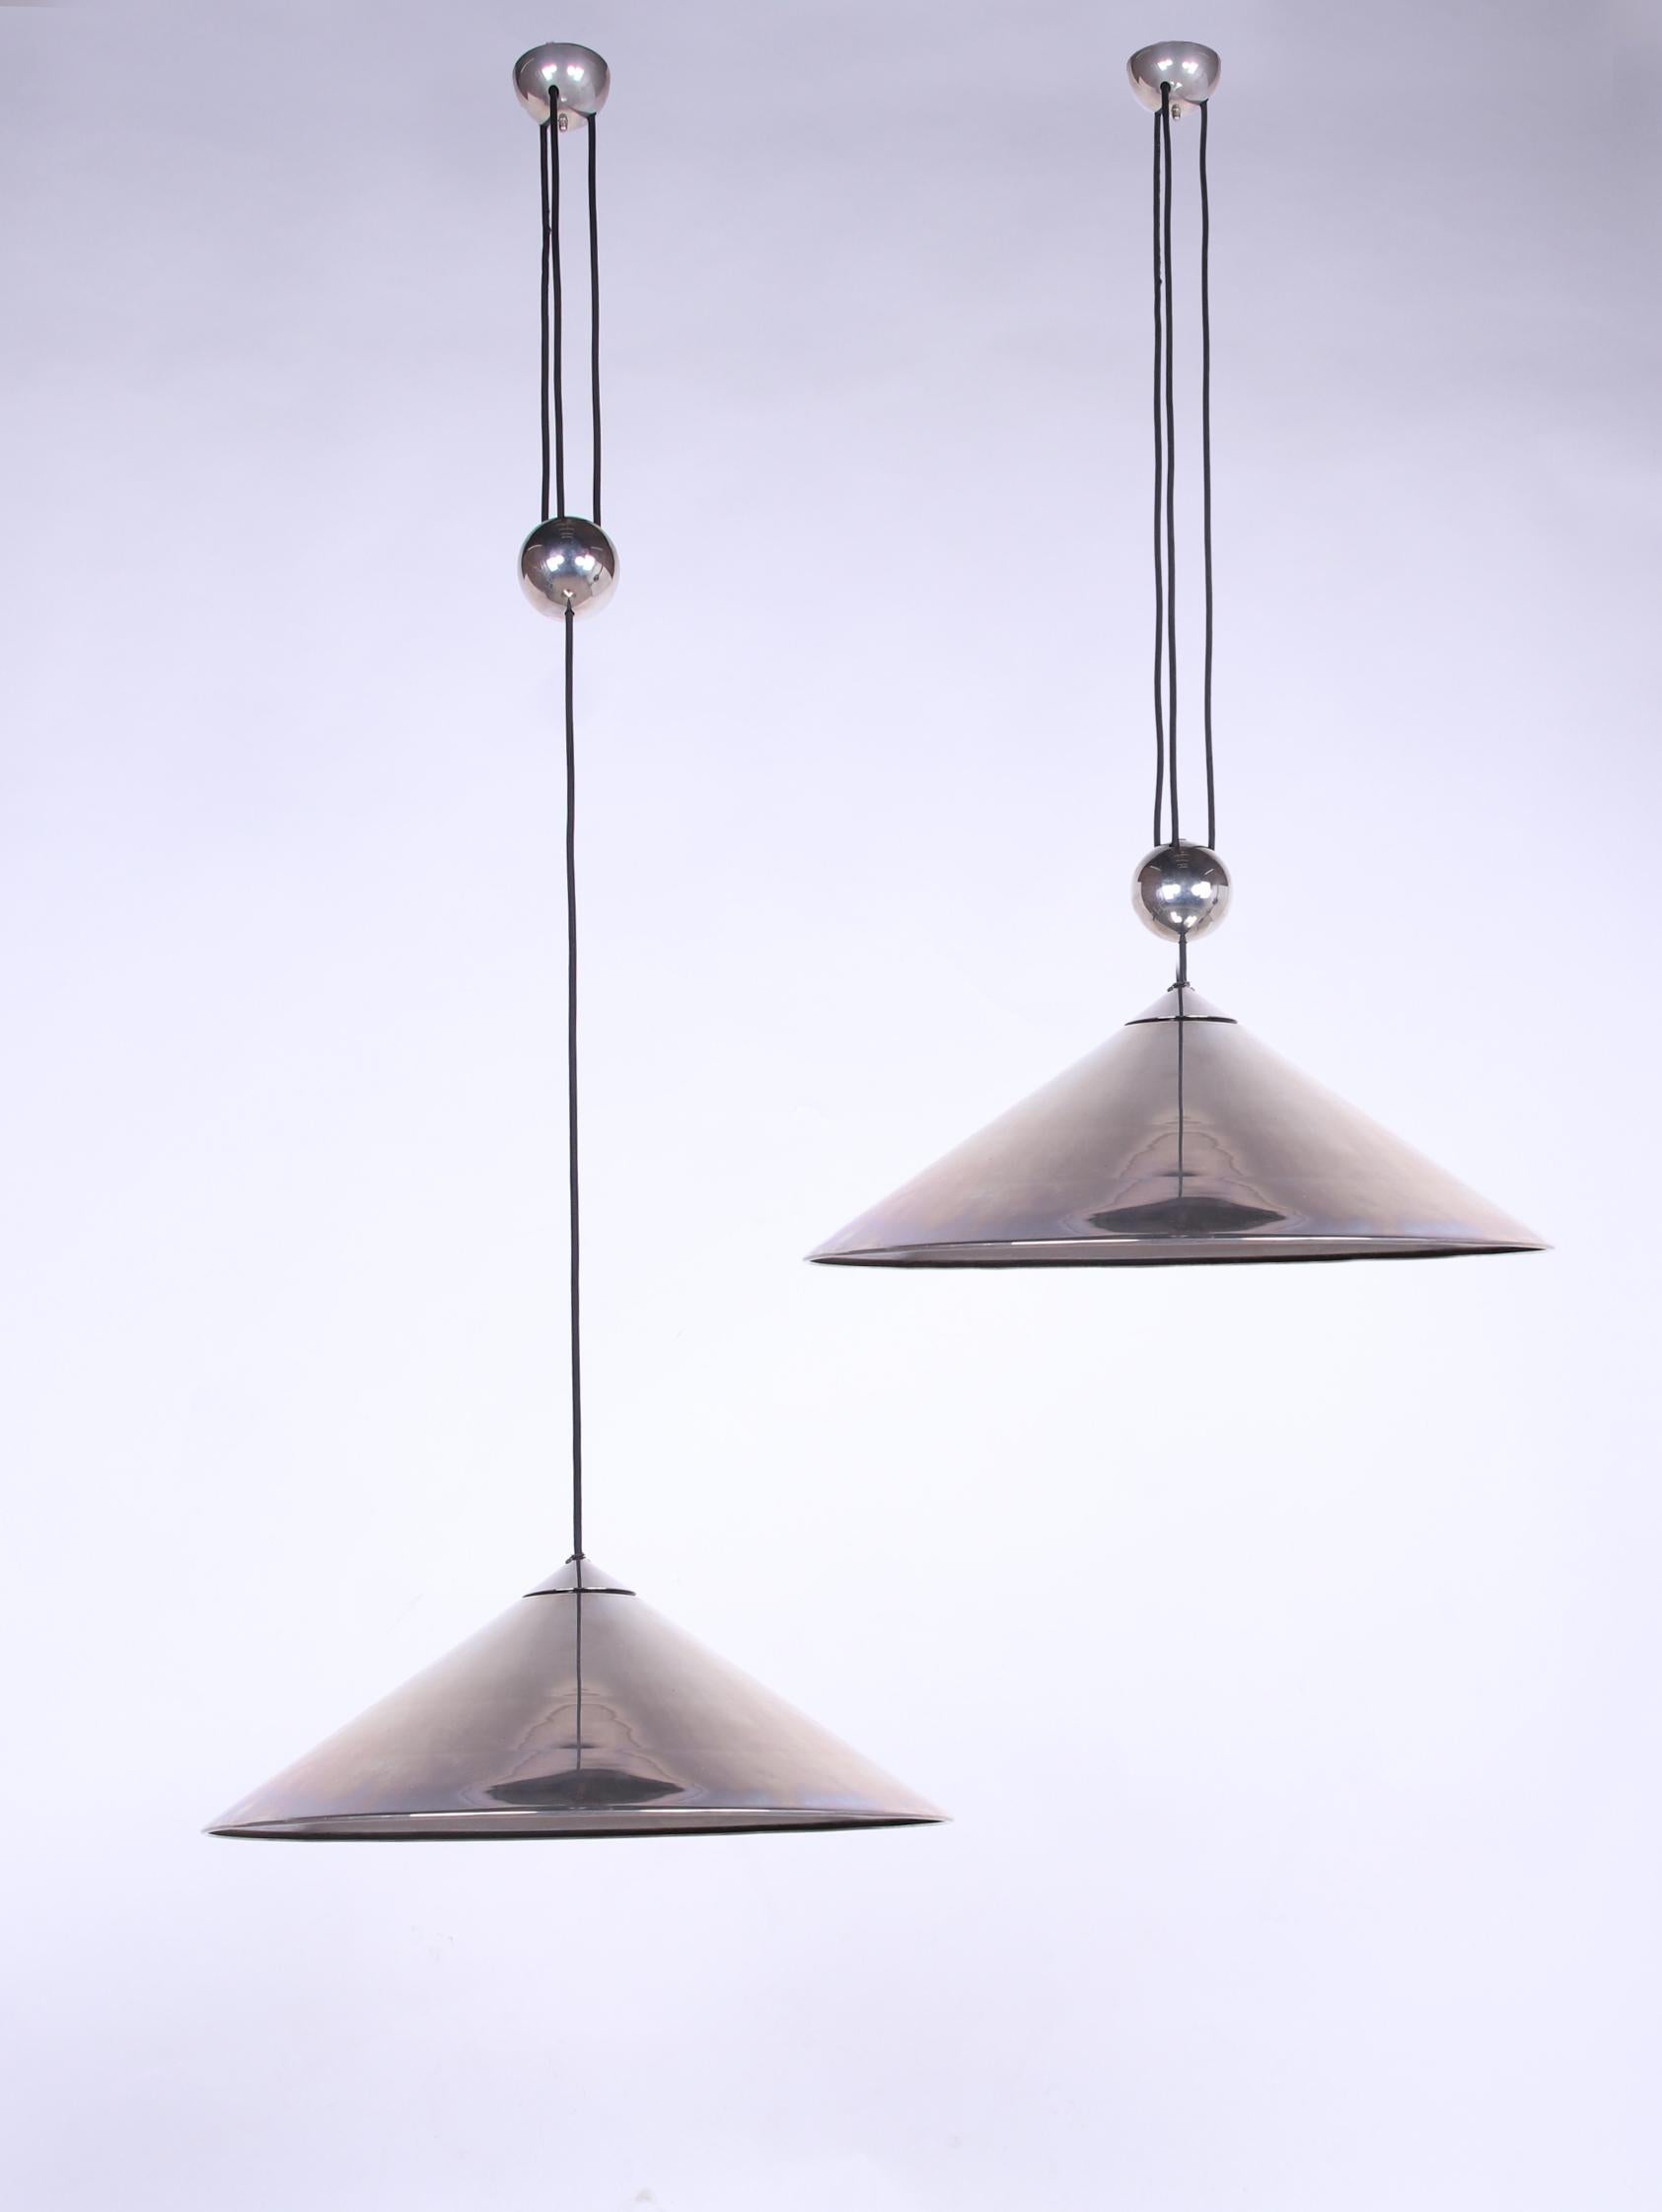 Mid-20th Century Adjustable Nickel Pendant Lamp Keos by Florian Schulz, Germany, 1970s For Sale